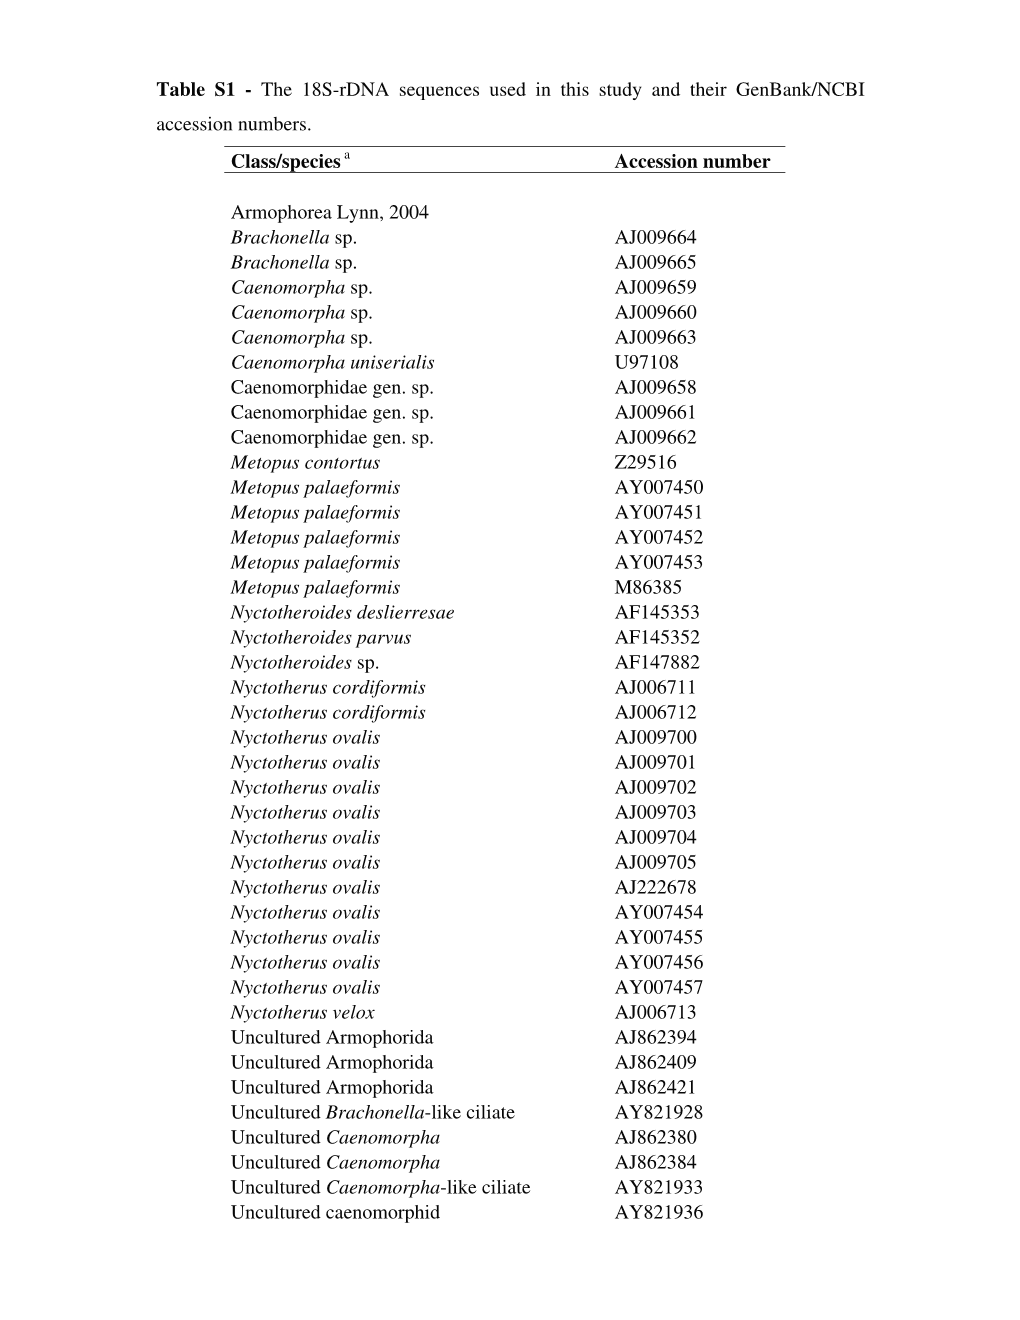 Table S1 - the 18S-Rdna Sequences Used in This Study and Their Genbank/NCBI Accession Numbers